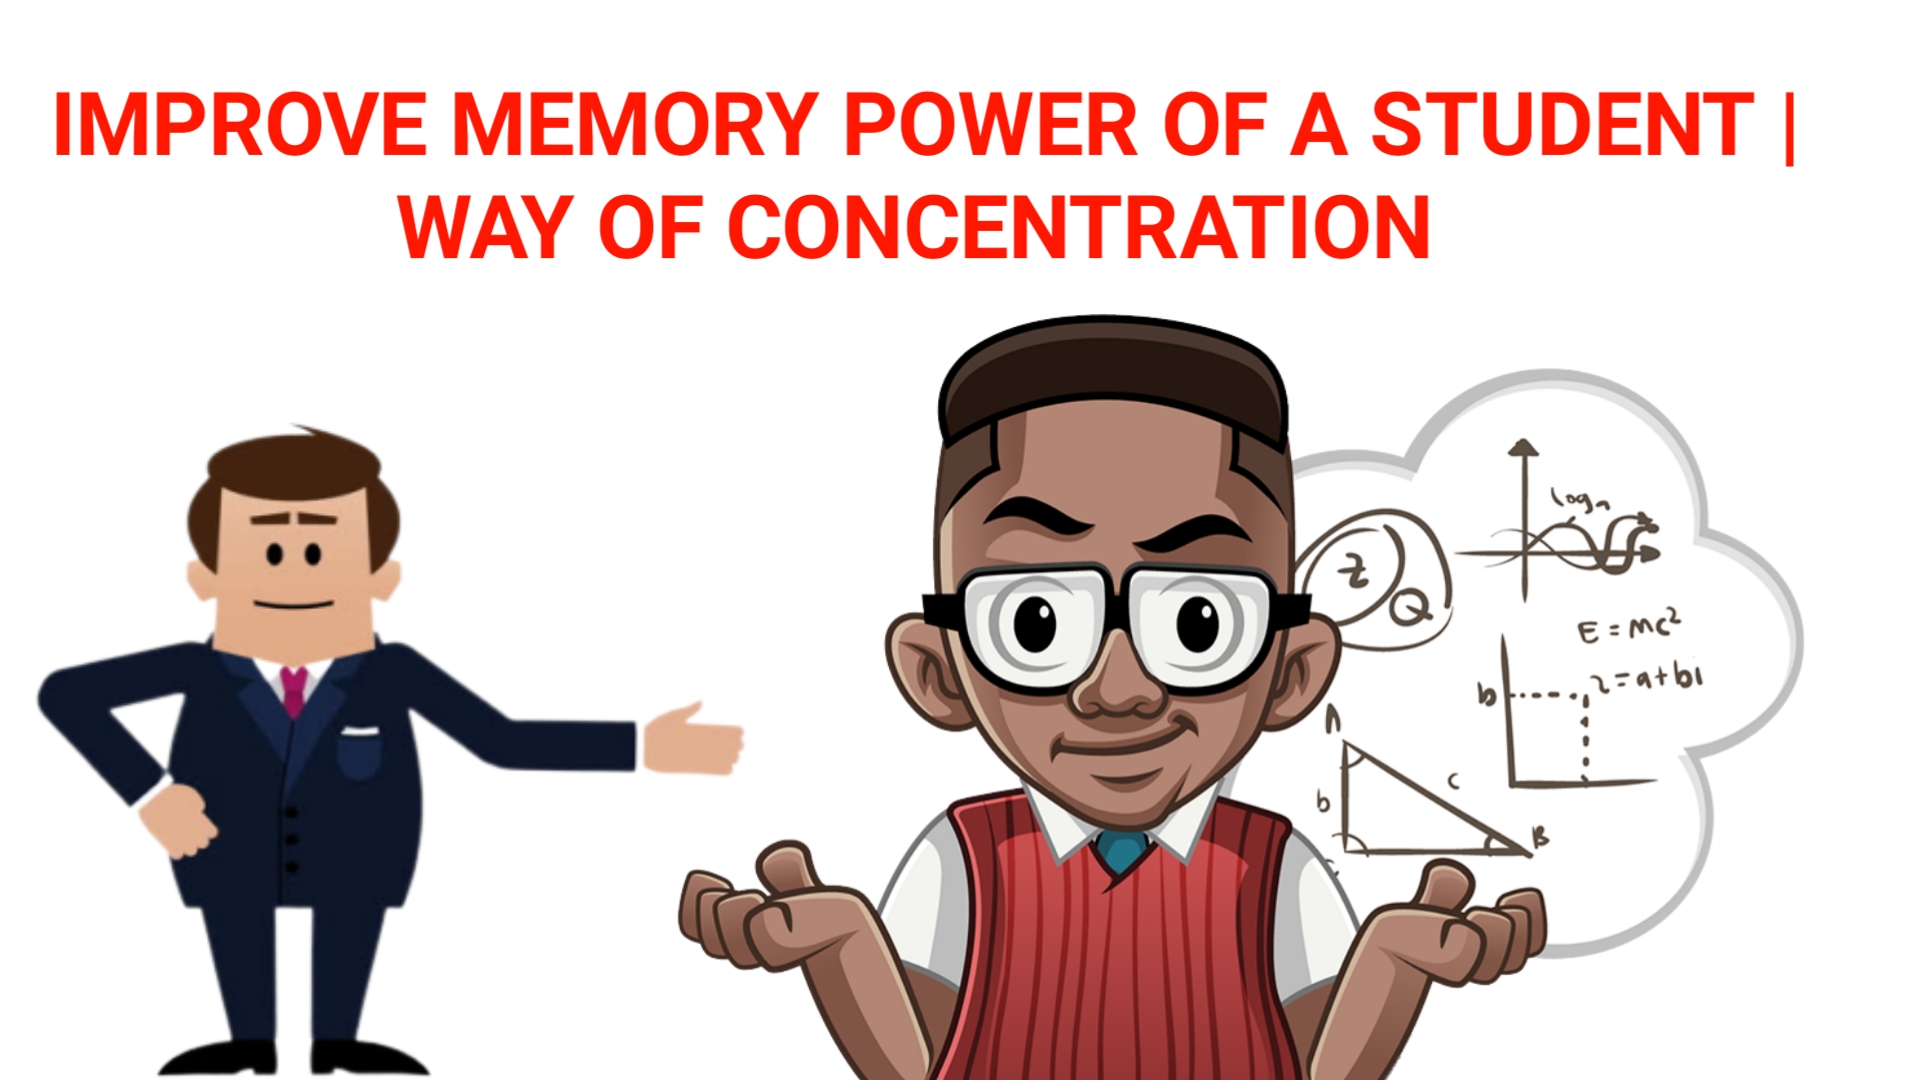 HOW TO IMPROVE CONCENTRATION AND MEMORY POWER FOR STUDENTS TO GET BETTER RESULTS IN STUDY